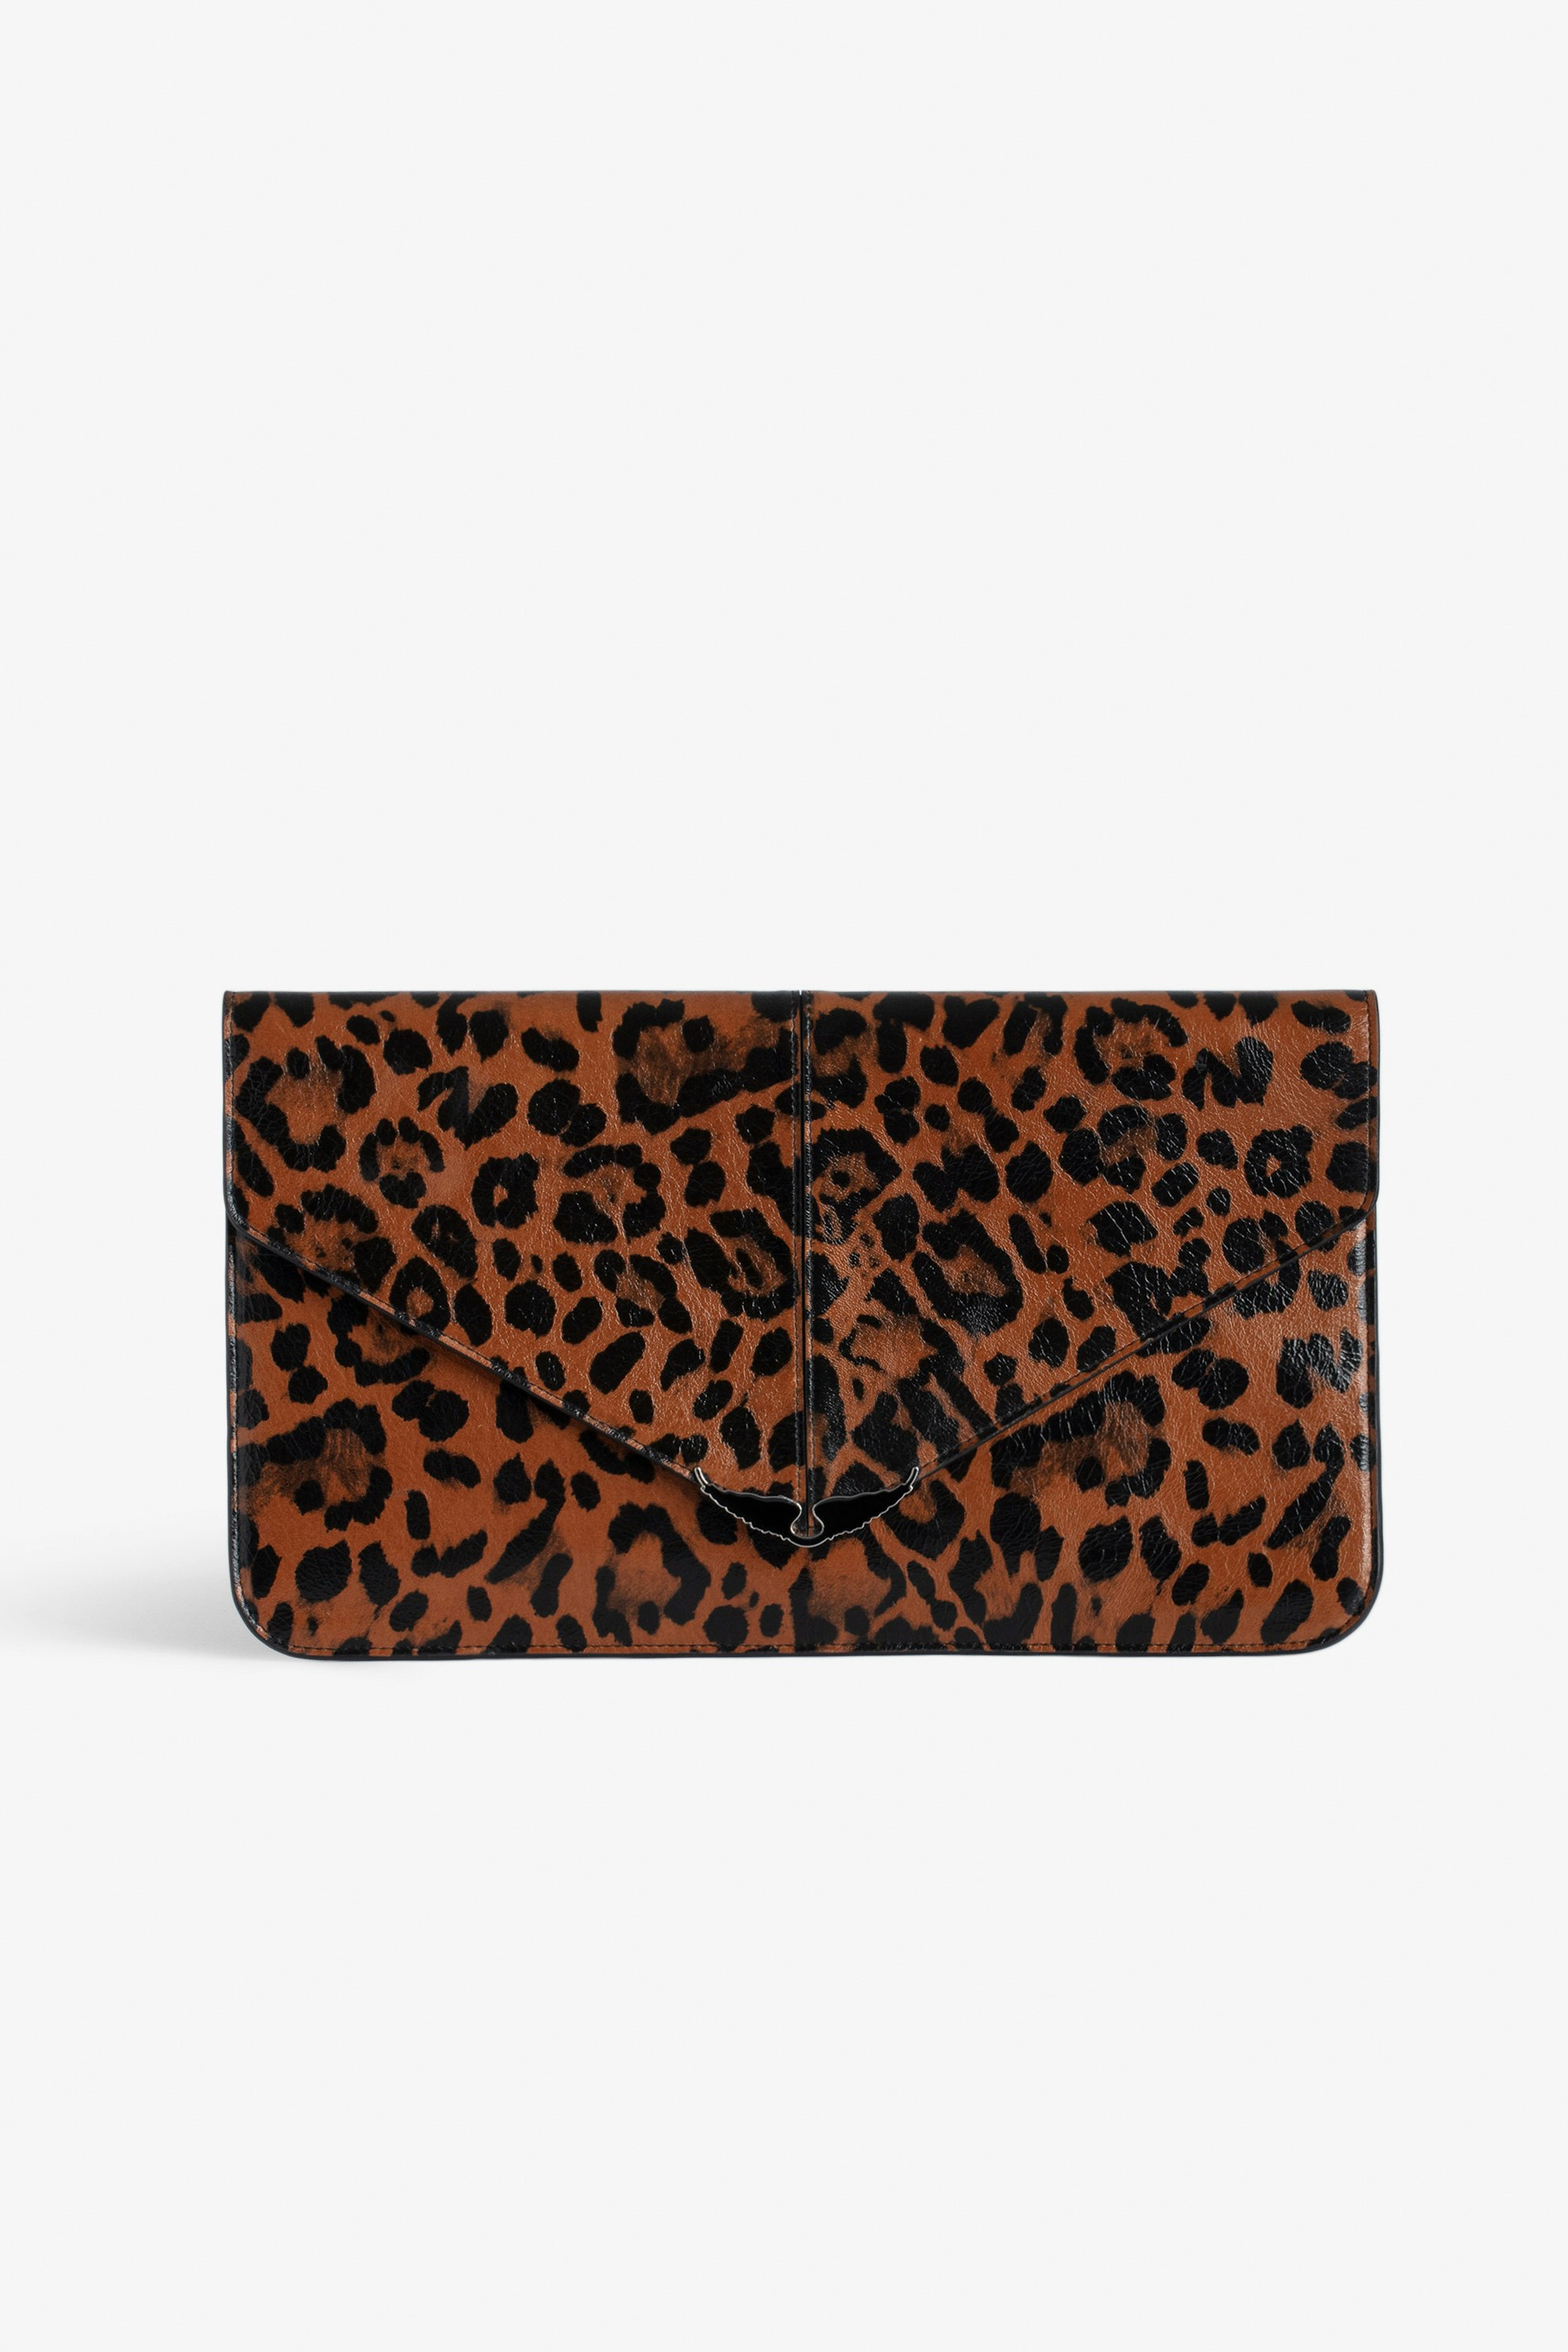 Borderline Leopard Pouch - Women’s brown leopard-print patent leather envelope clutch with wings charm.